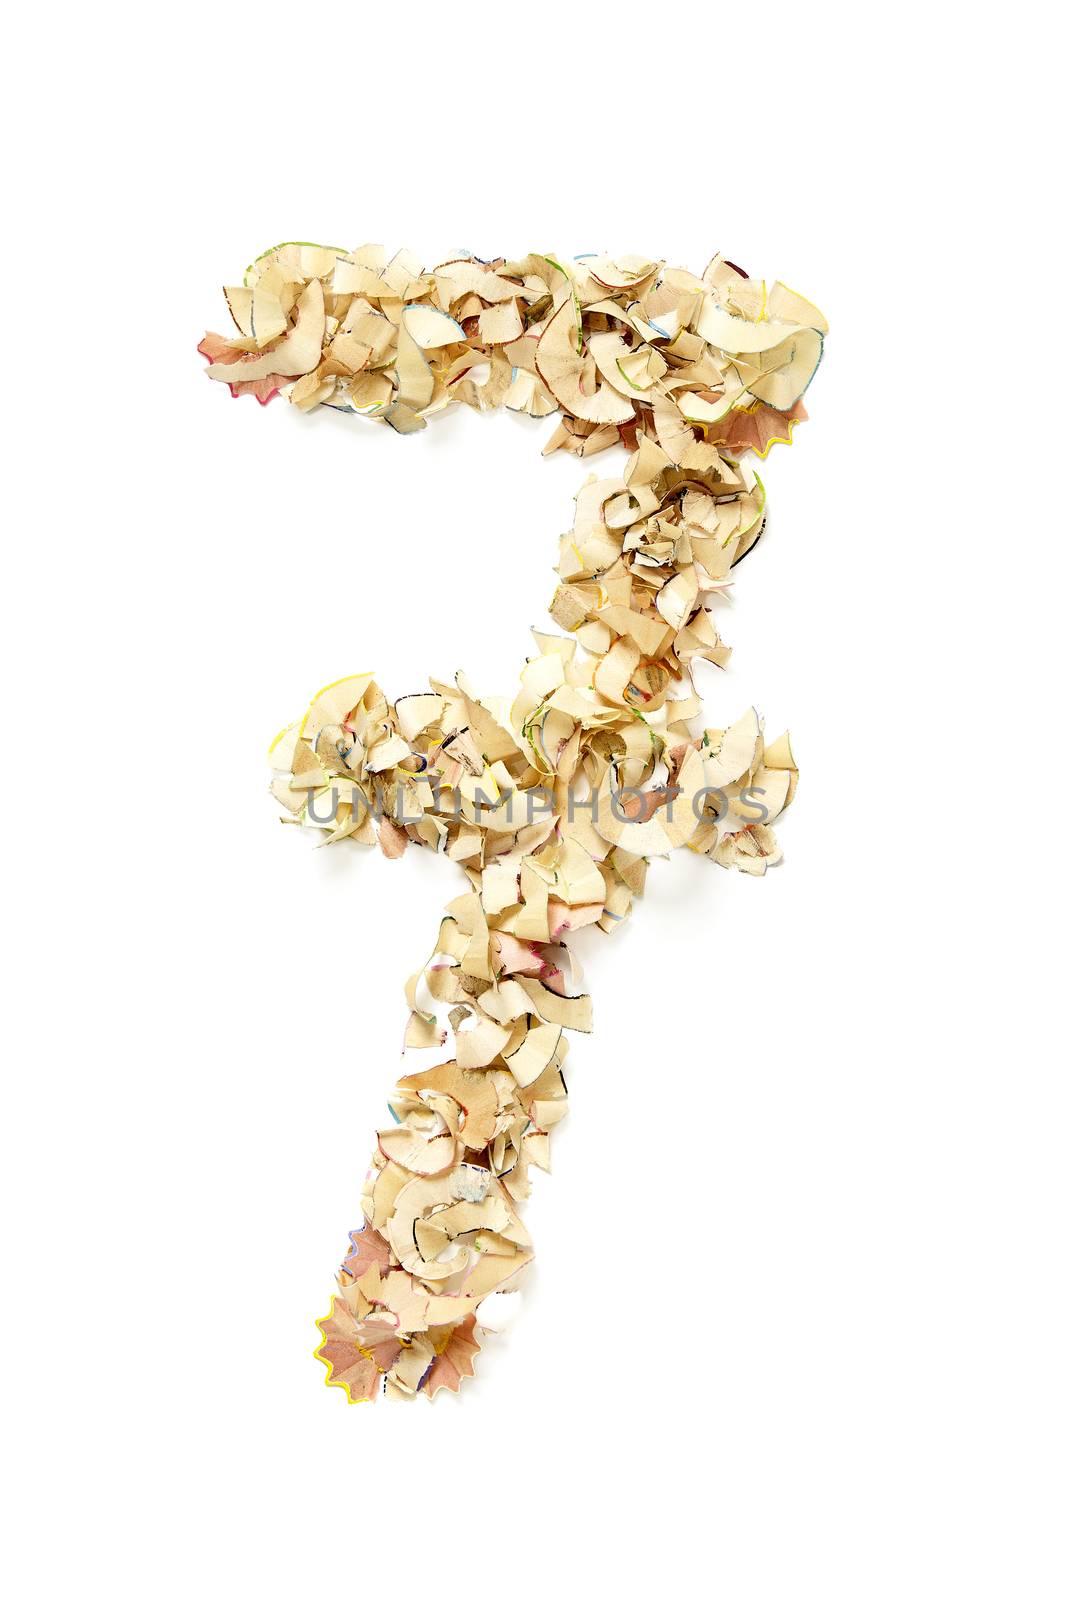 Number 7 made of pencil shavings